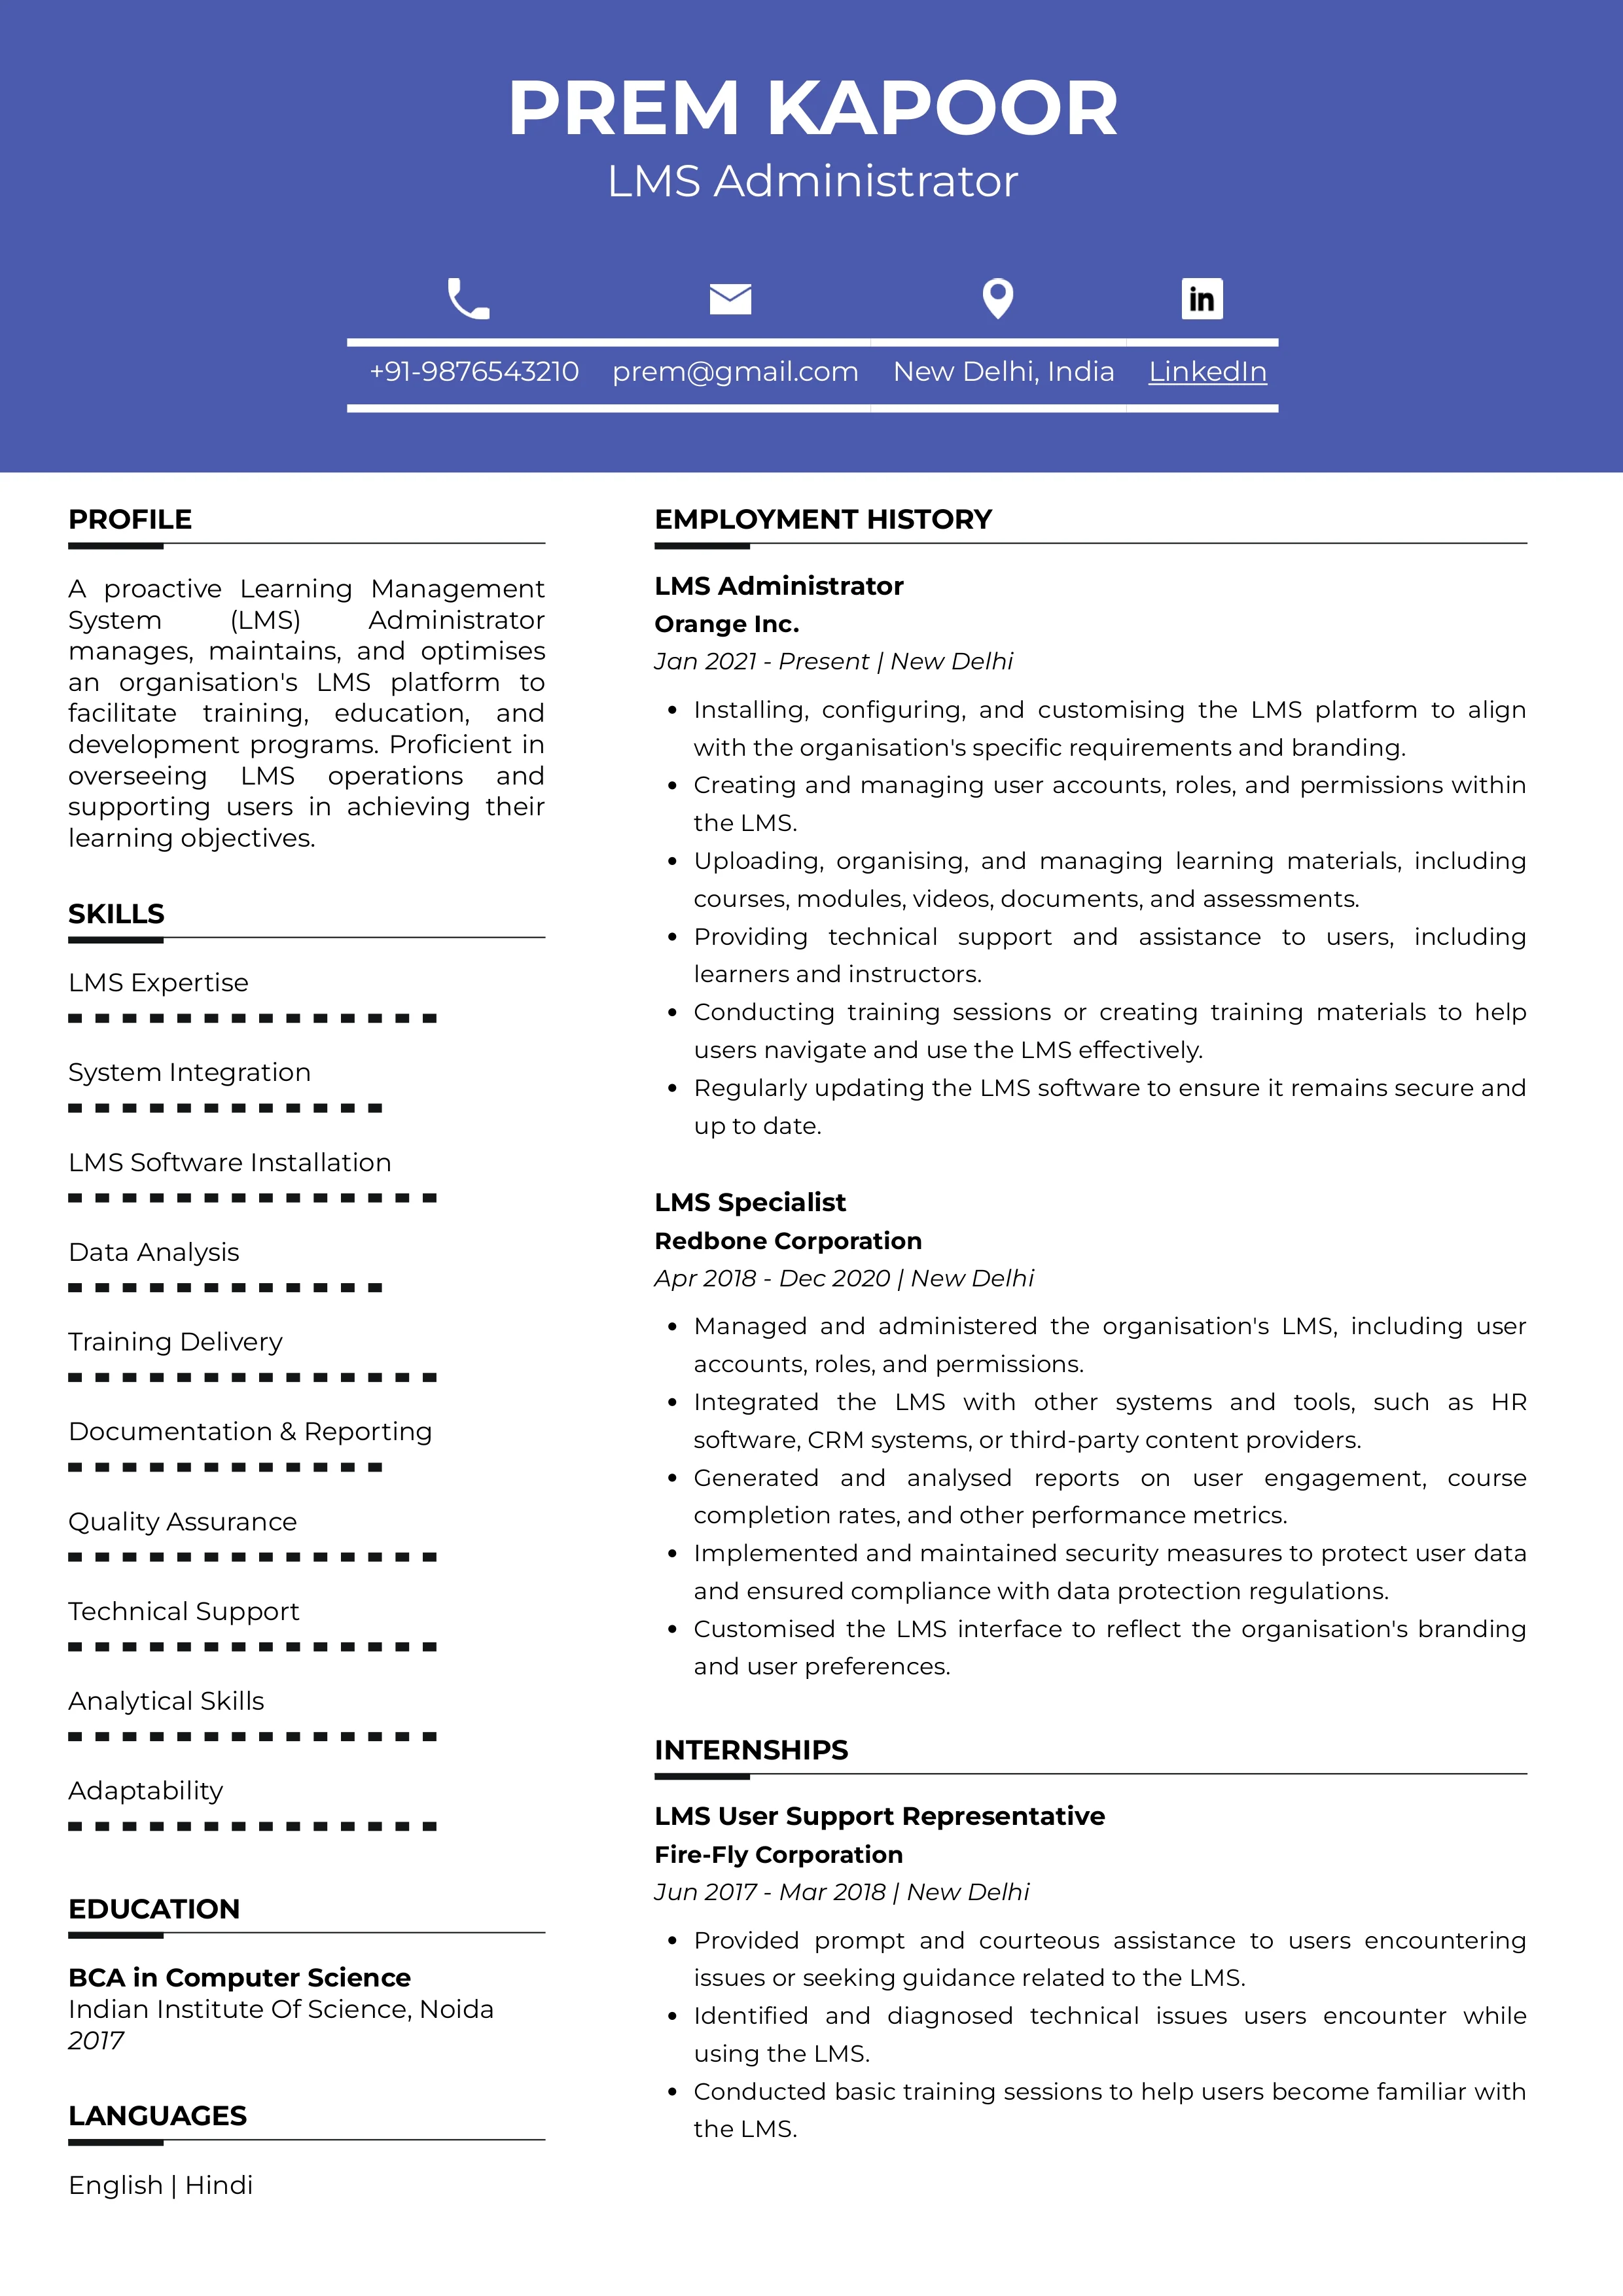 Sample Resume of LMS Administrator | Free Resume Templates & Samples on Resumod.co